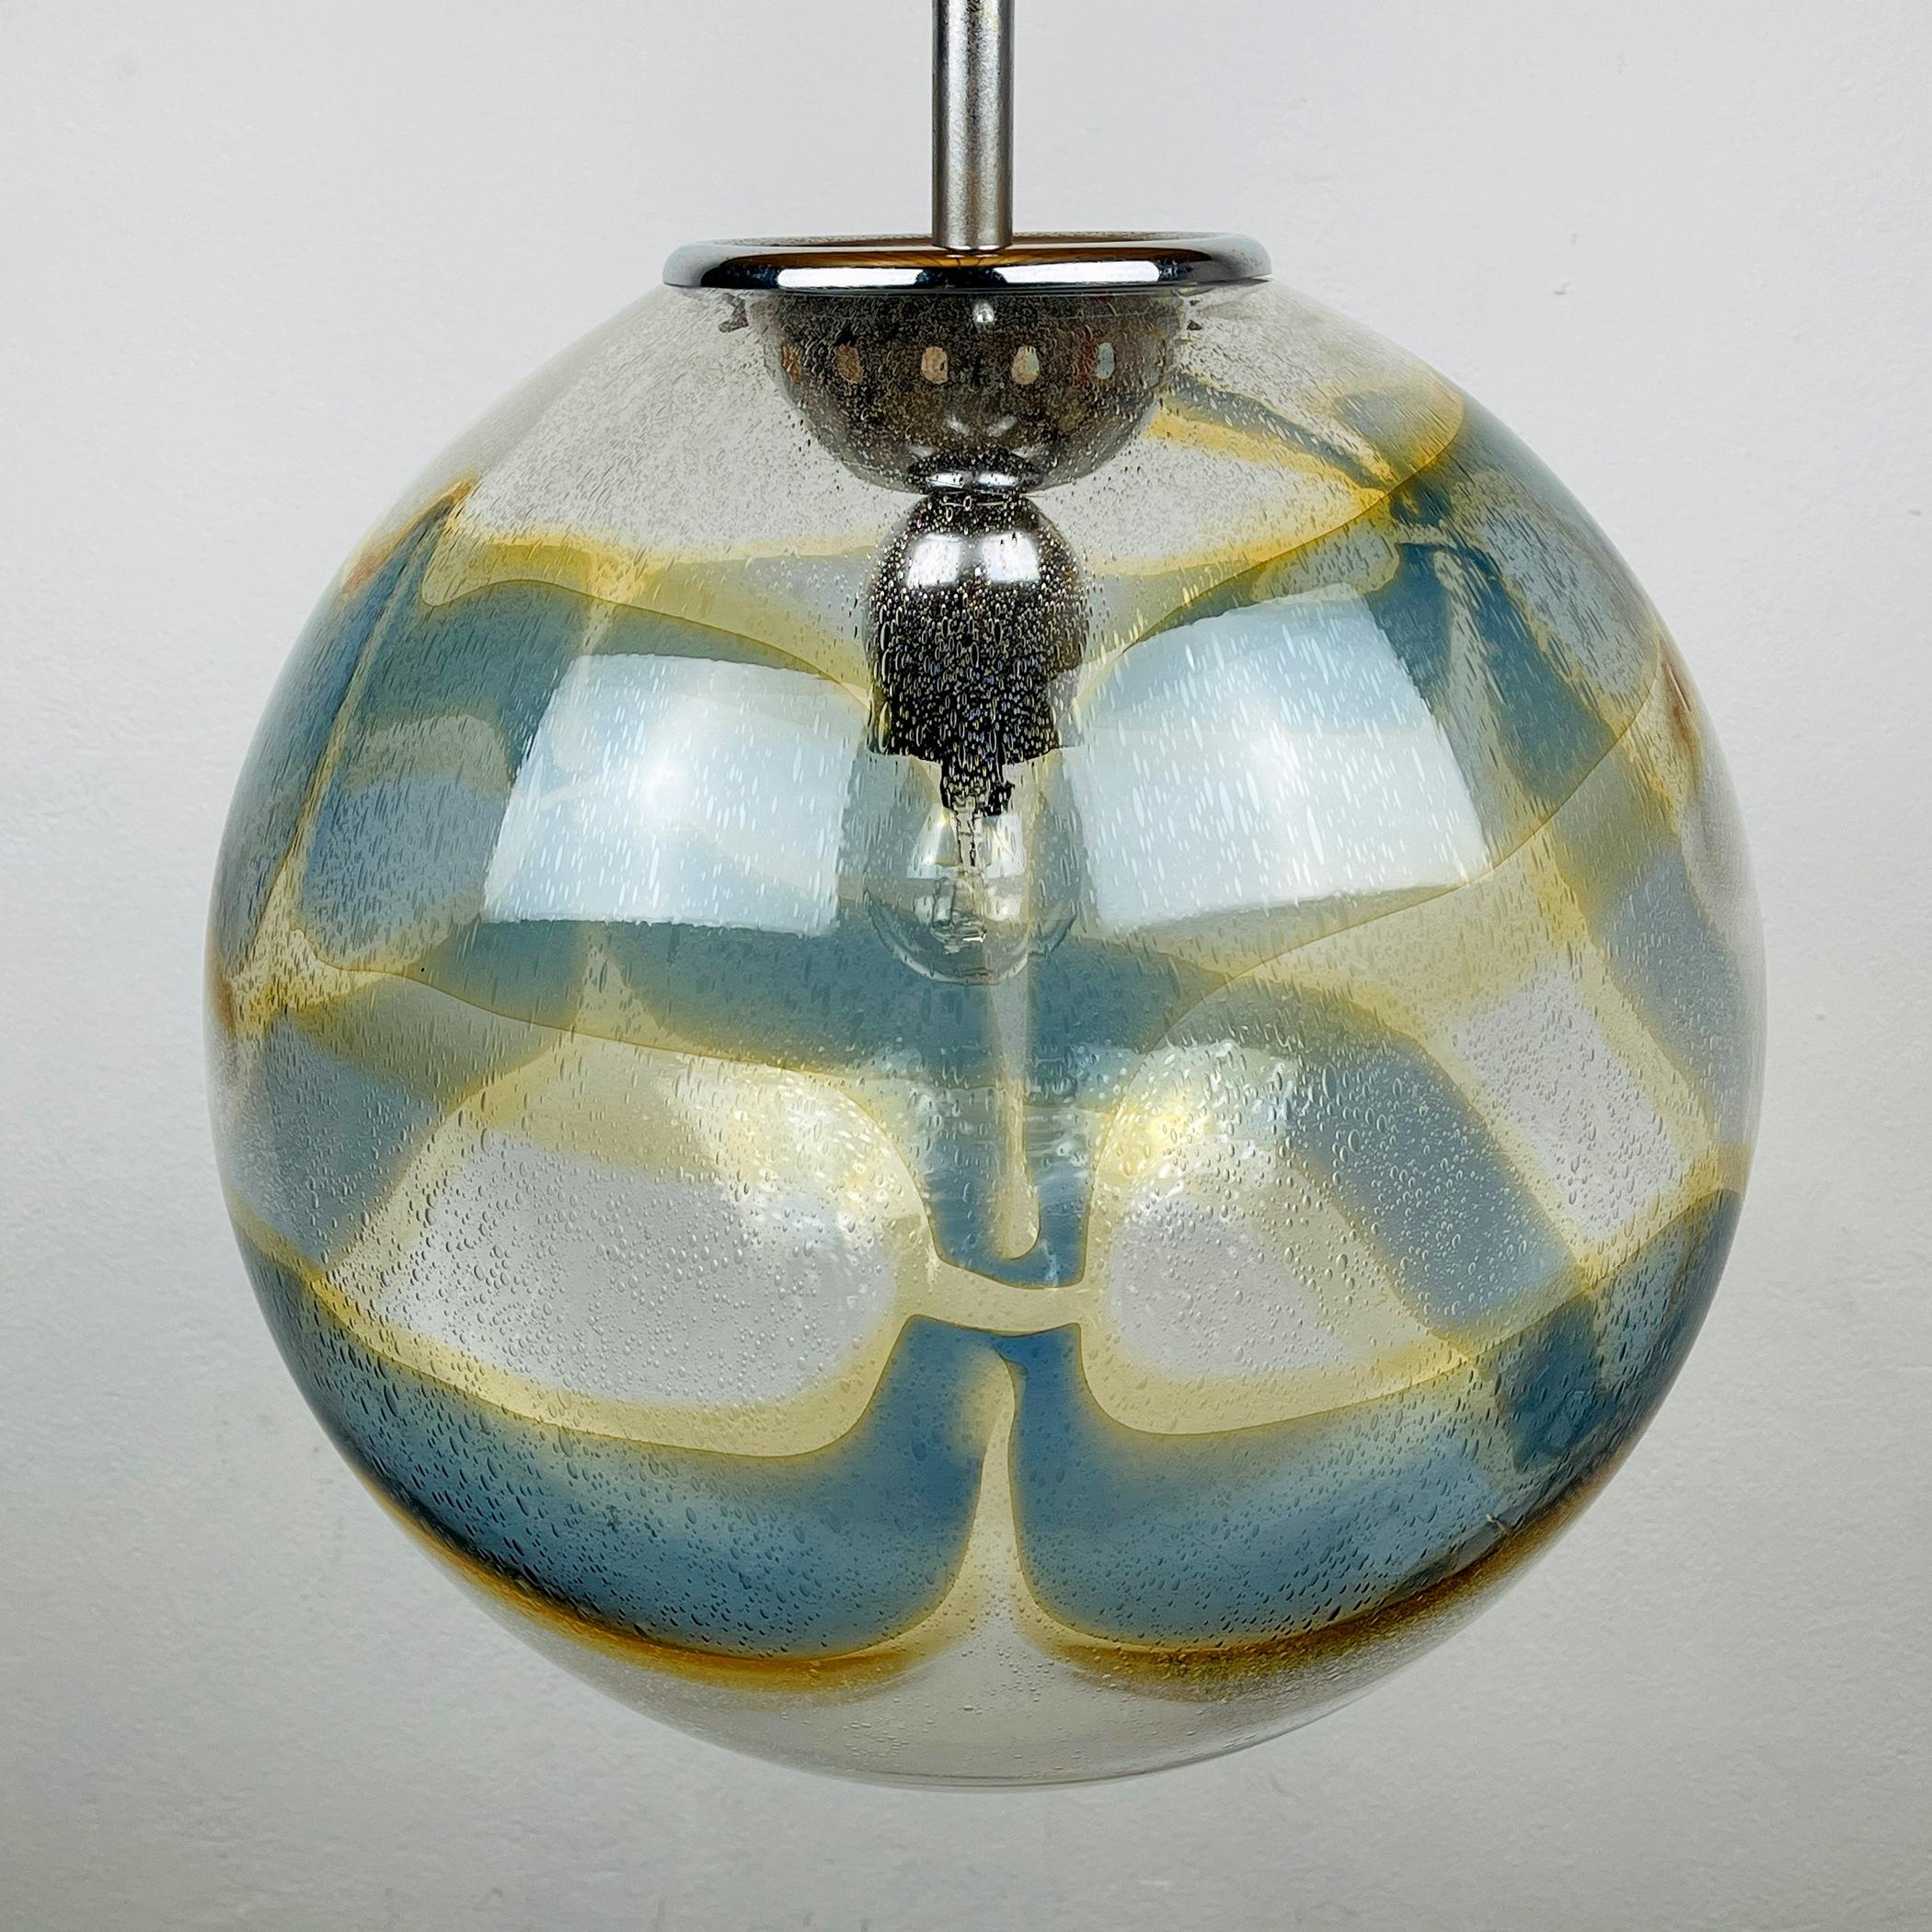 Mid-Century Modern Vintage Xl Swirled Murano Glass Pendant Lamp by Vistosi Italy, 1970s For Sale